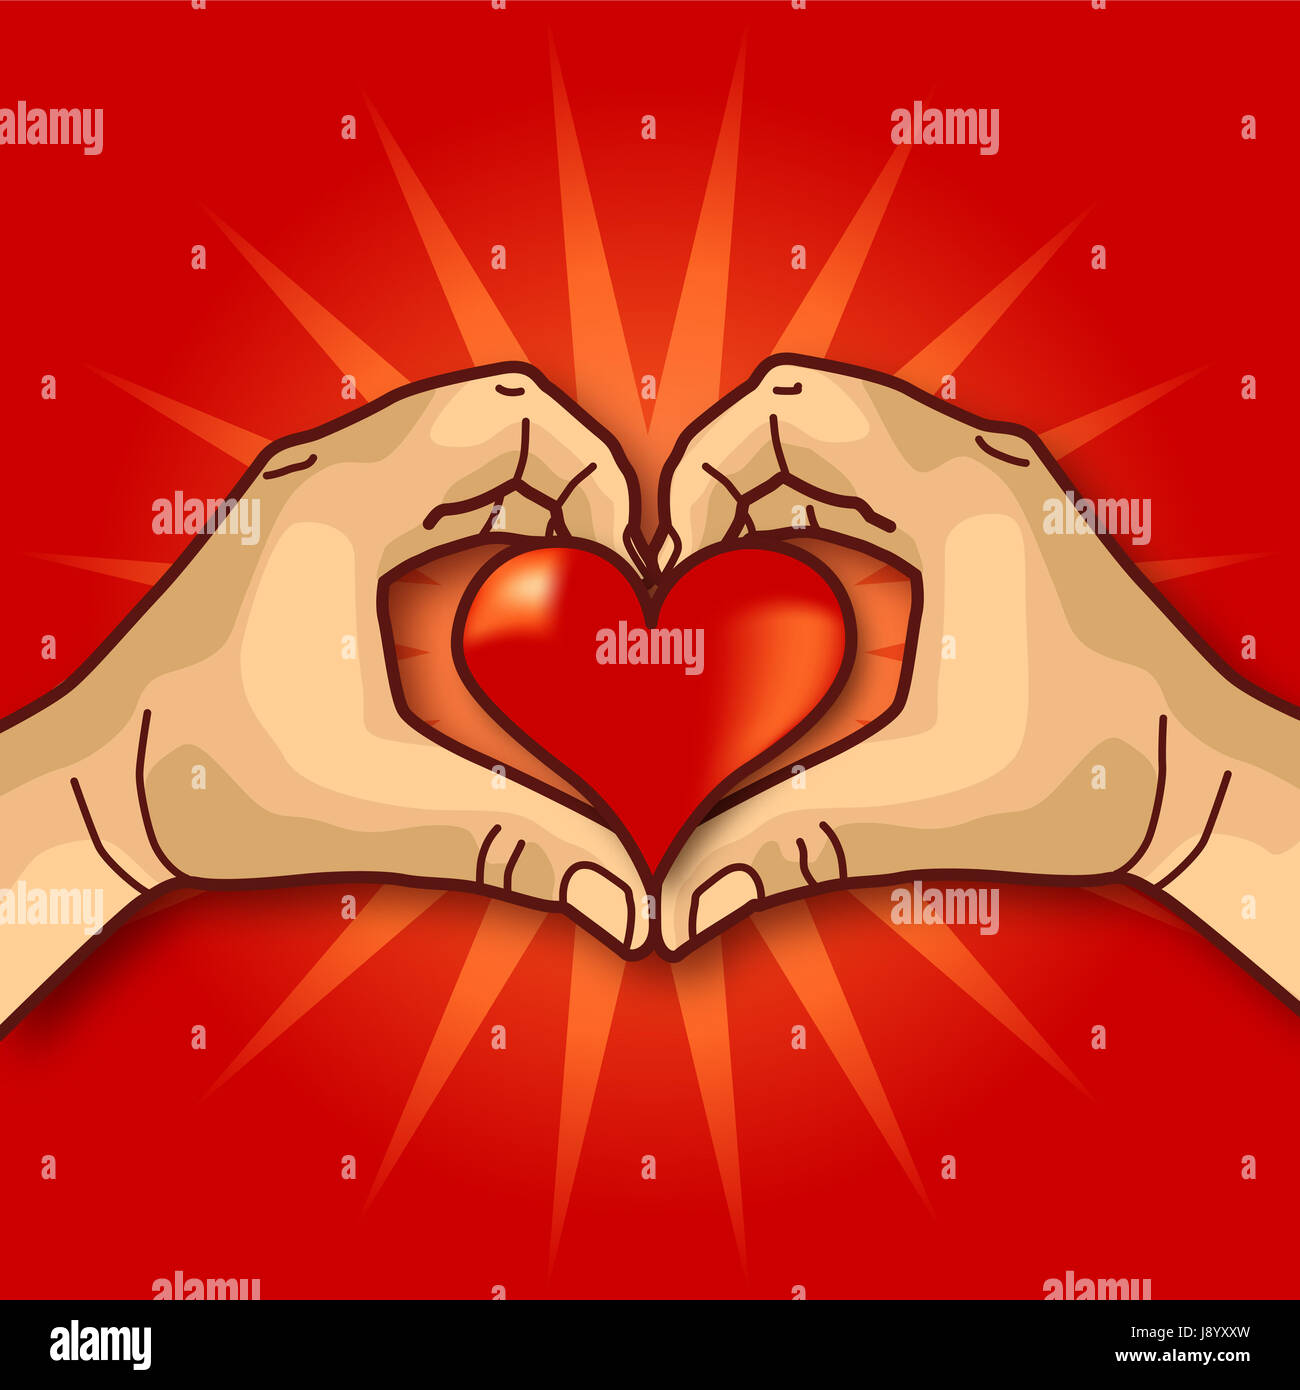 hand, finger, quality, heart, signification, meaning, significance, thumbs, Stock Photo